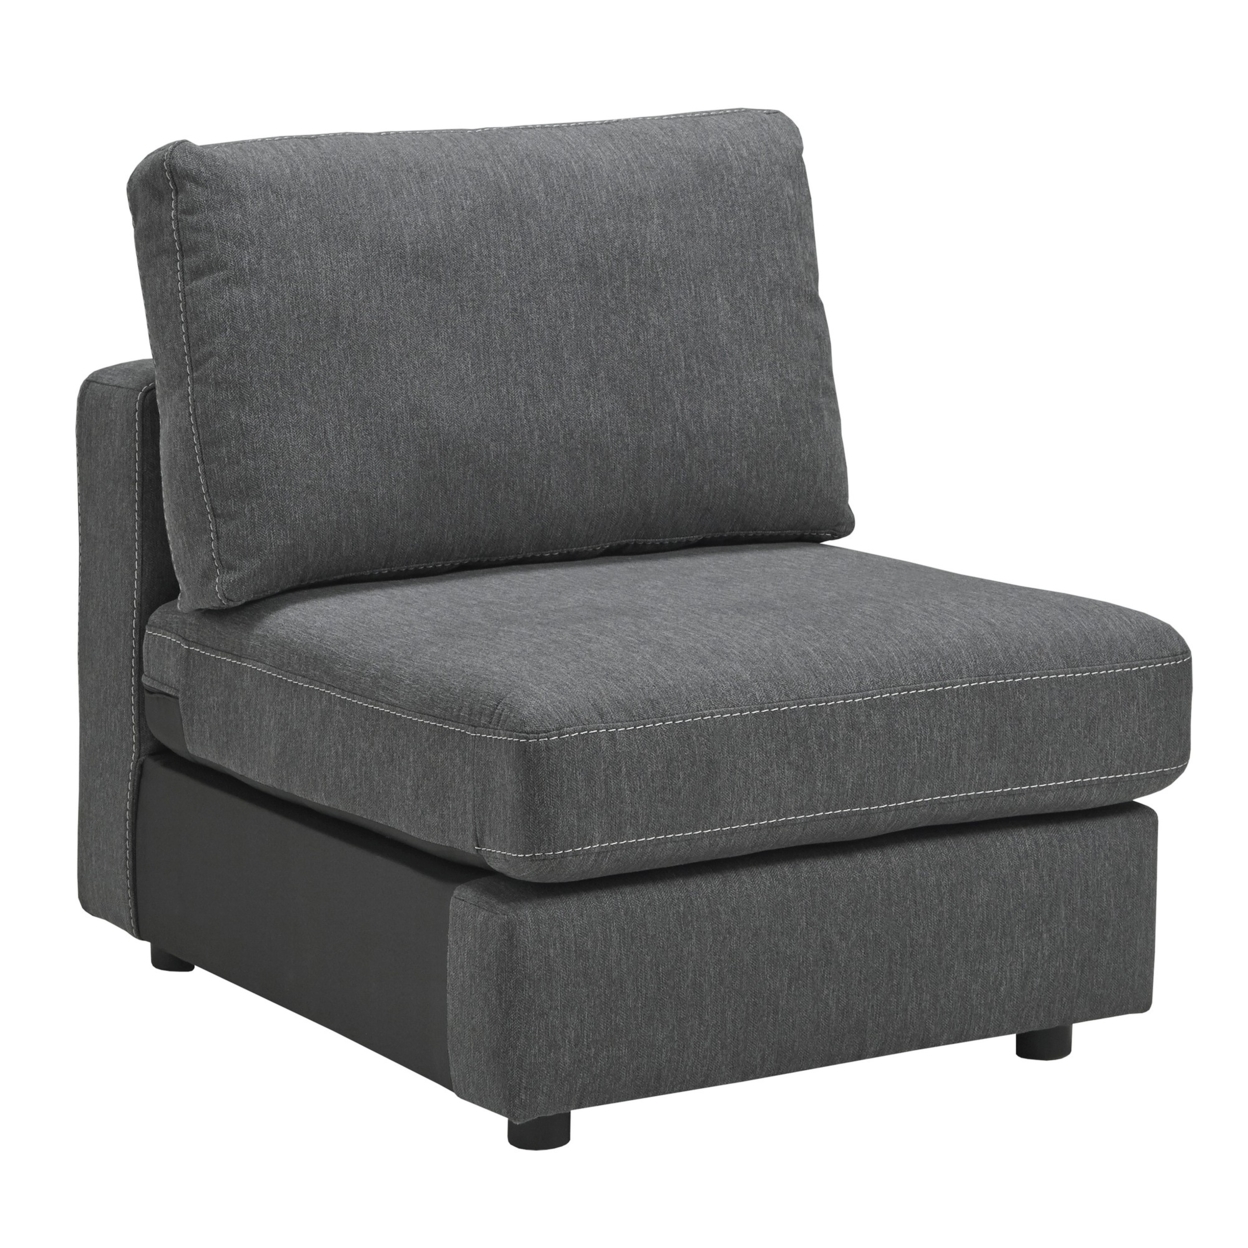 Armless Chair With Fabric Padded Seat And Block Legs, Gray- Saltoro Sherpi